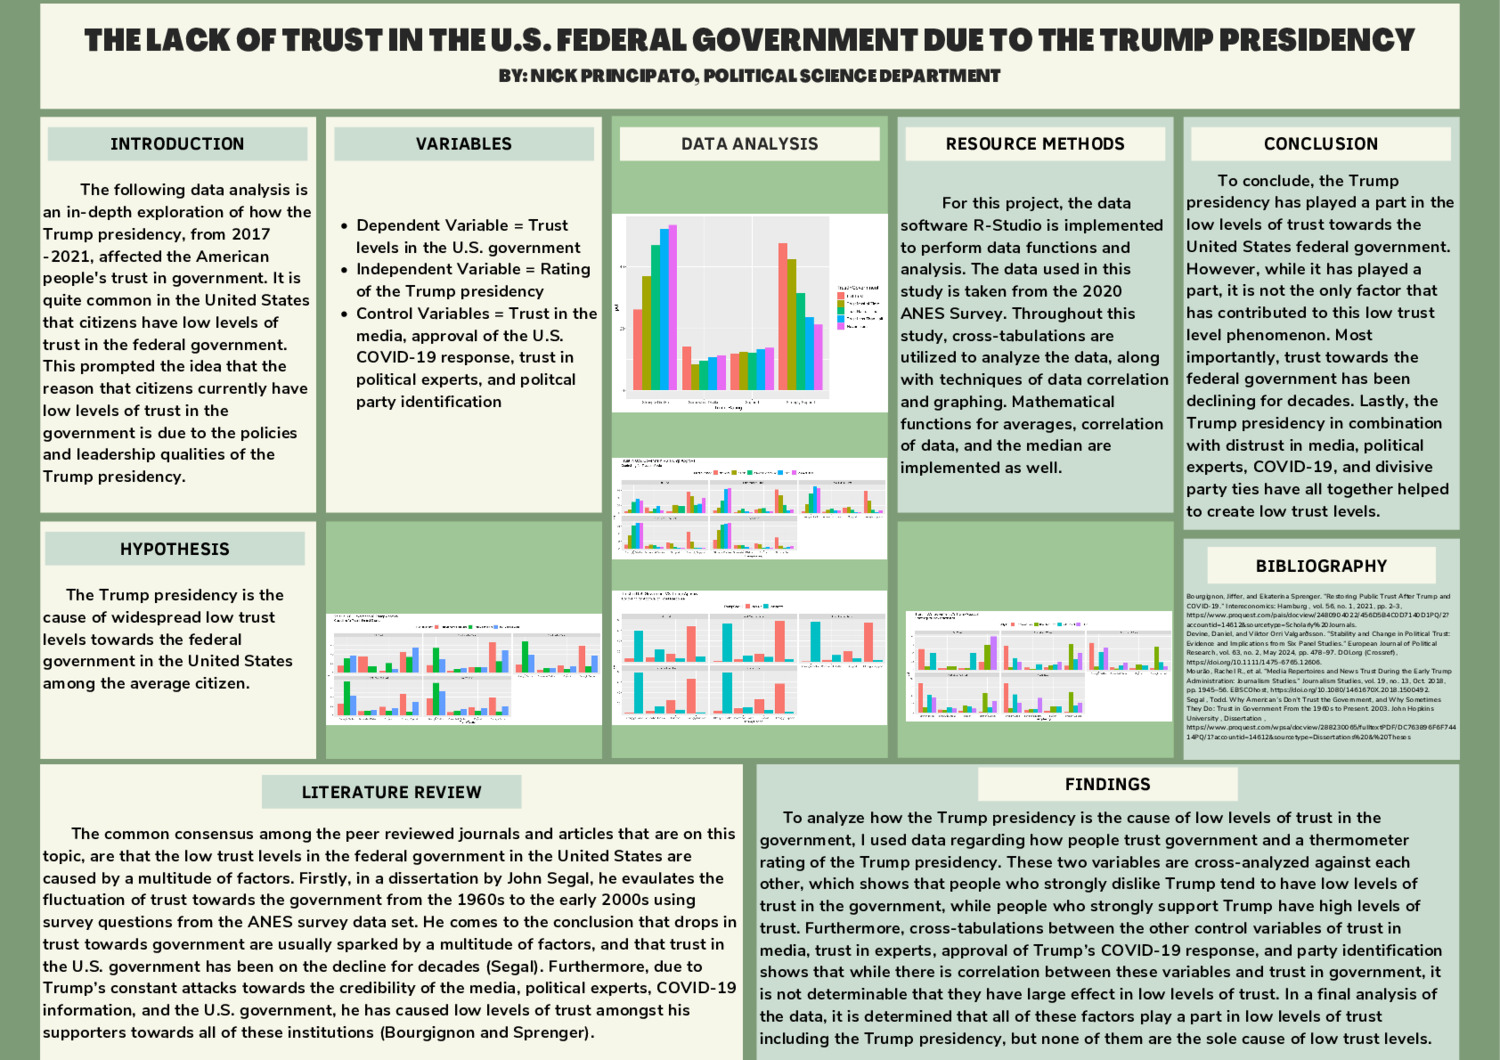 The Lack Of Trust In The U.S. Federal Government Due To The Trump Presidency by nmp1061